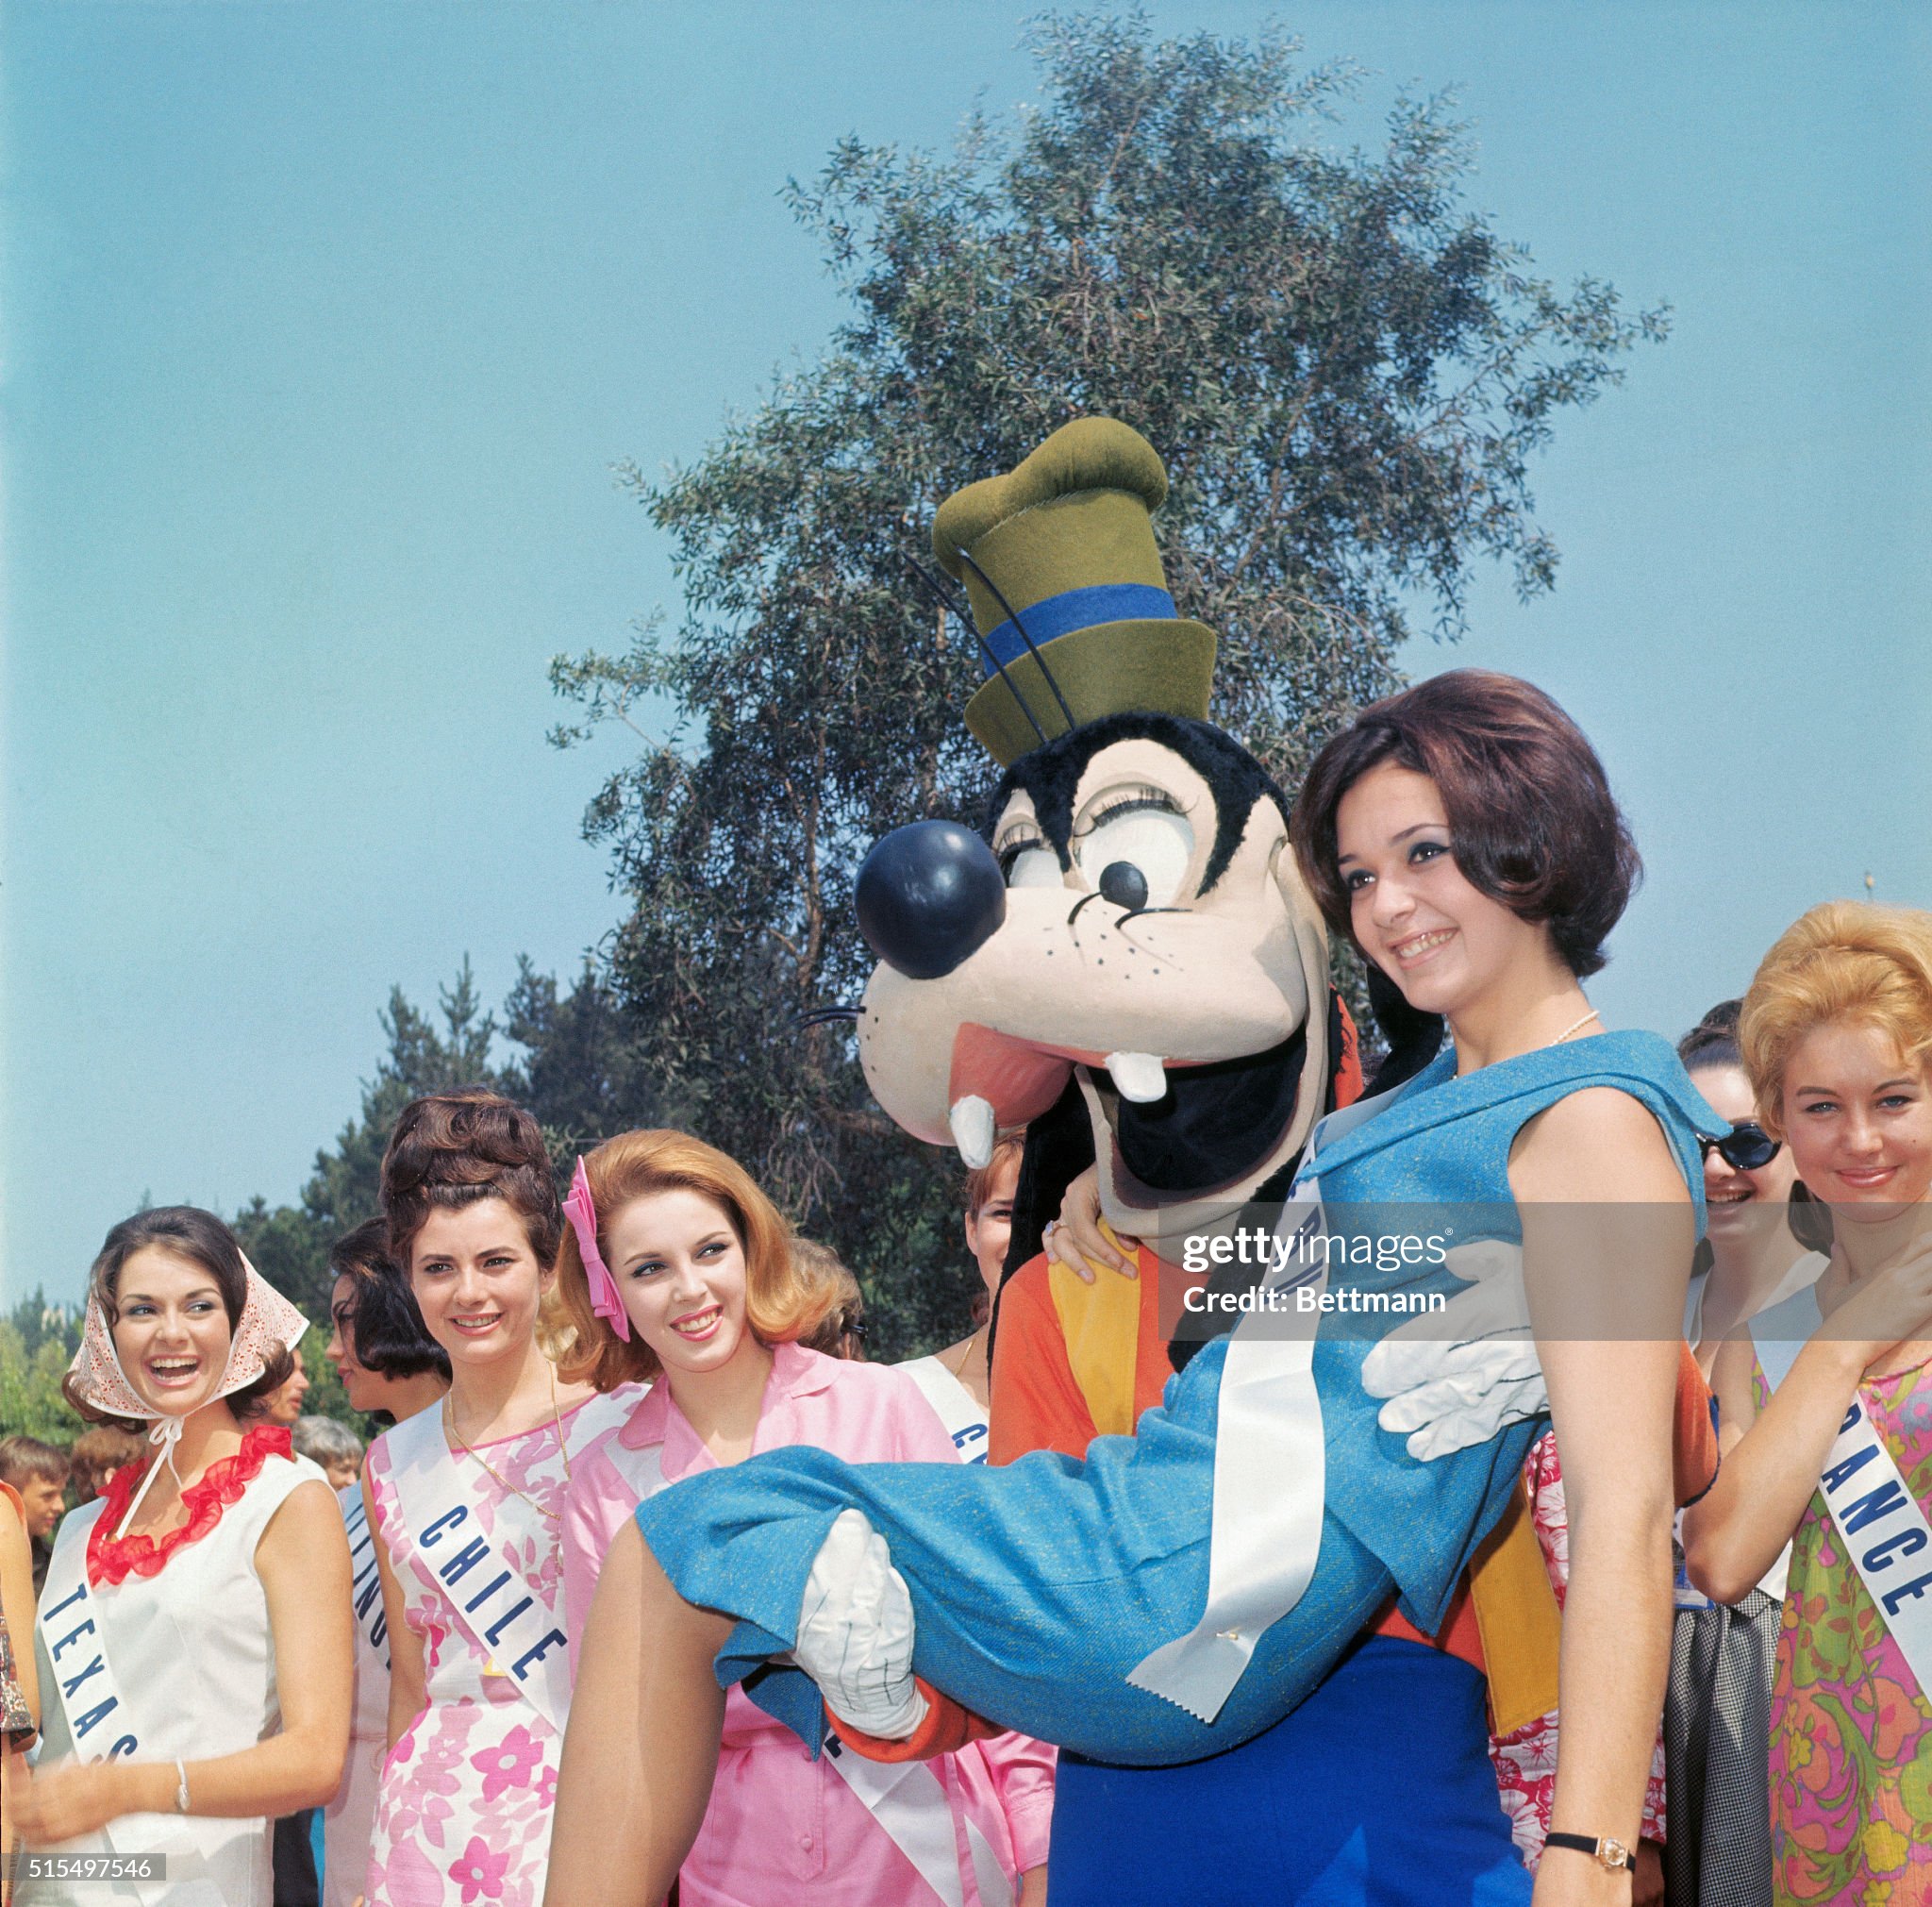 Disneyland's Goofy character with girls to compete for the International beauty queen title in Long Beach on August 06, 1965.